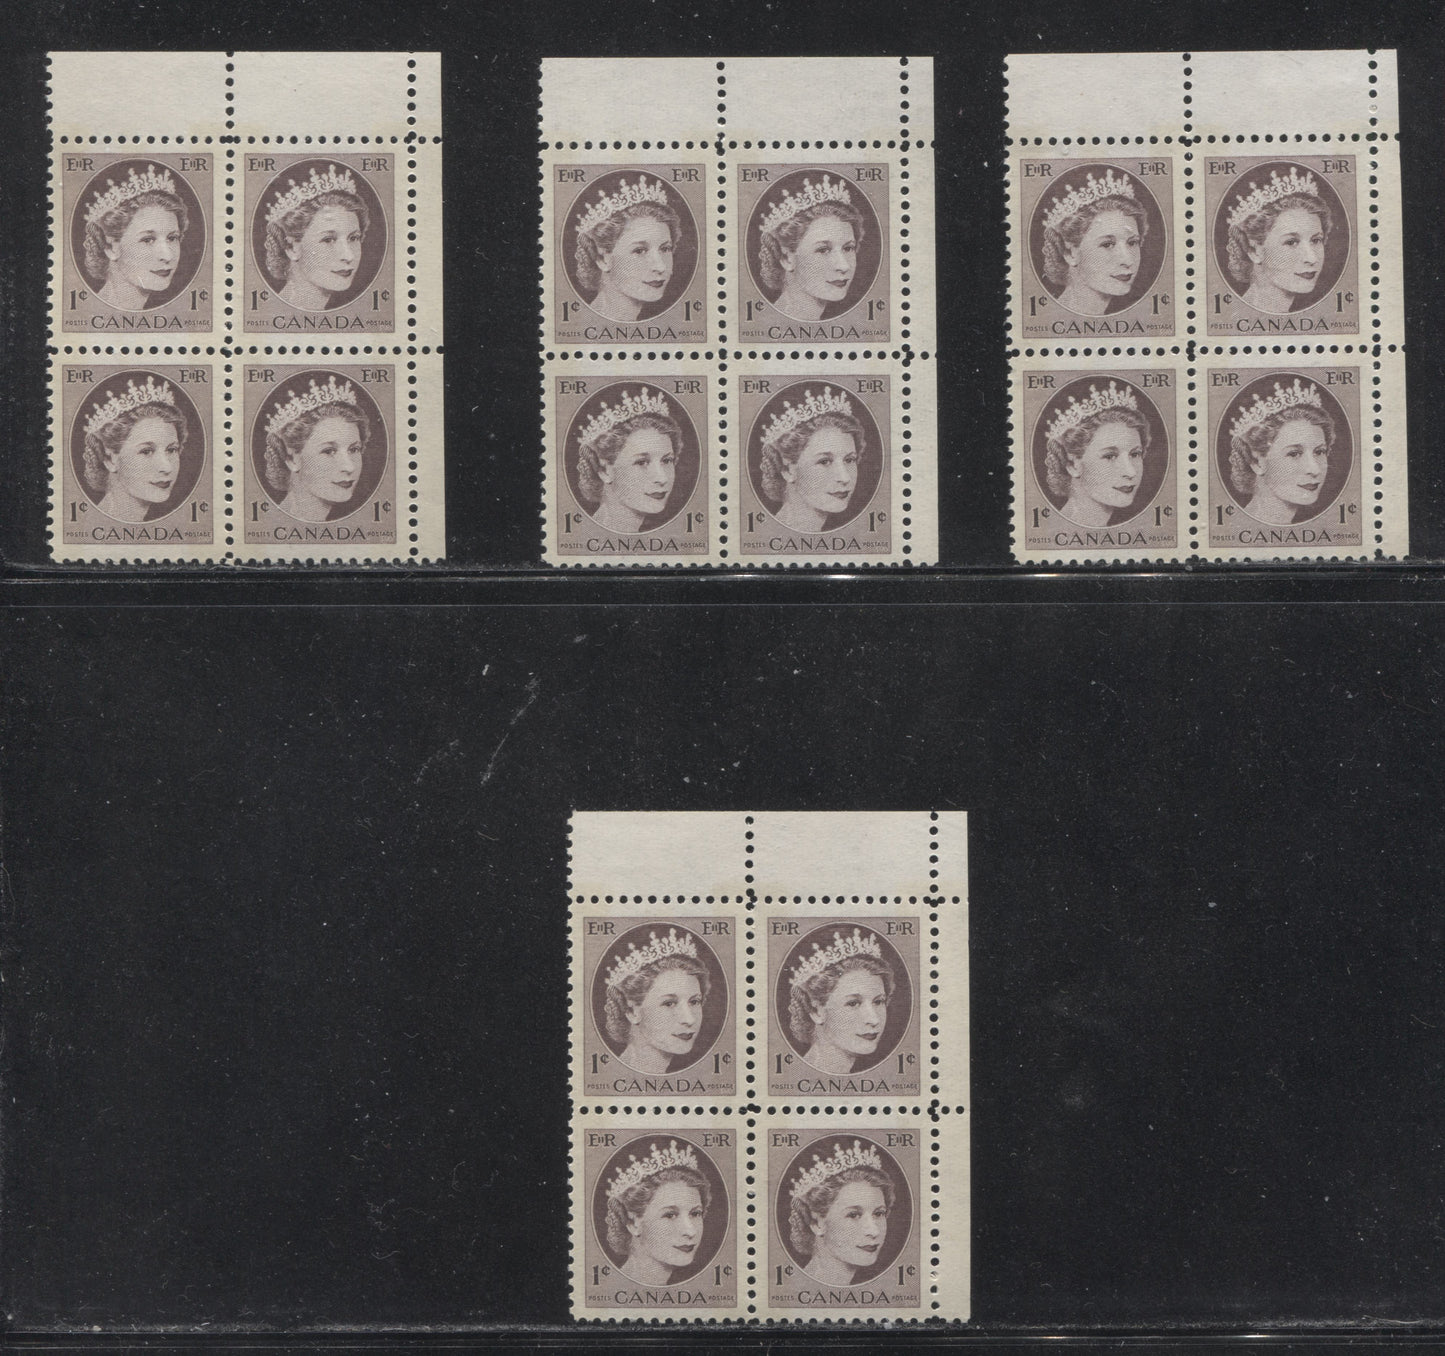 Canada #337p(var) 1c Chocolate Queen Elizabeth II, 1954-1962 Wilding Issue, Upper Right Blank Winnipeg Tagged Blocks of 4, Four Different, Various Perfs., DF Gr Vertically Ribbed Paper, Streaky Semi Gloss Gum, Bluish White Tagging With Extra Streak, VFNH Brixton Chrome 